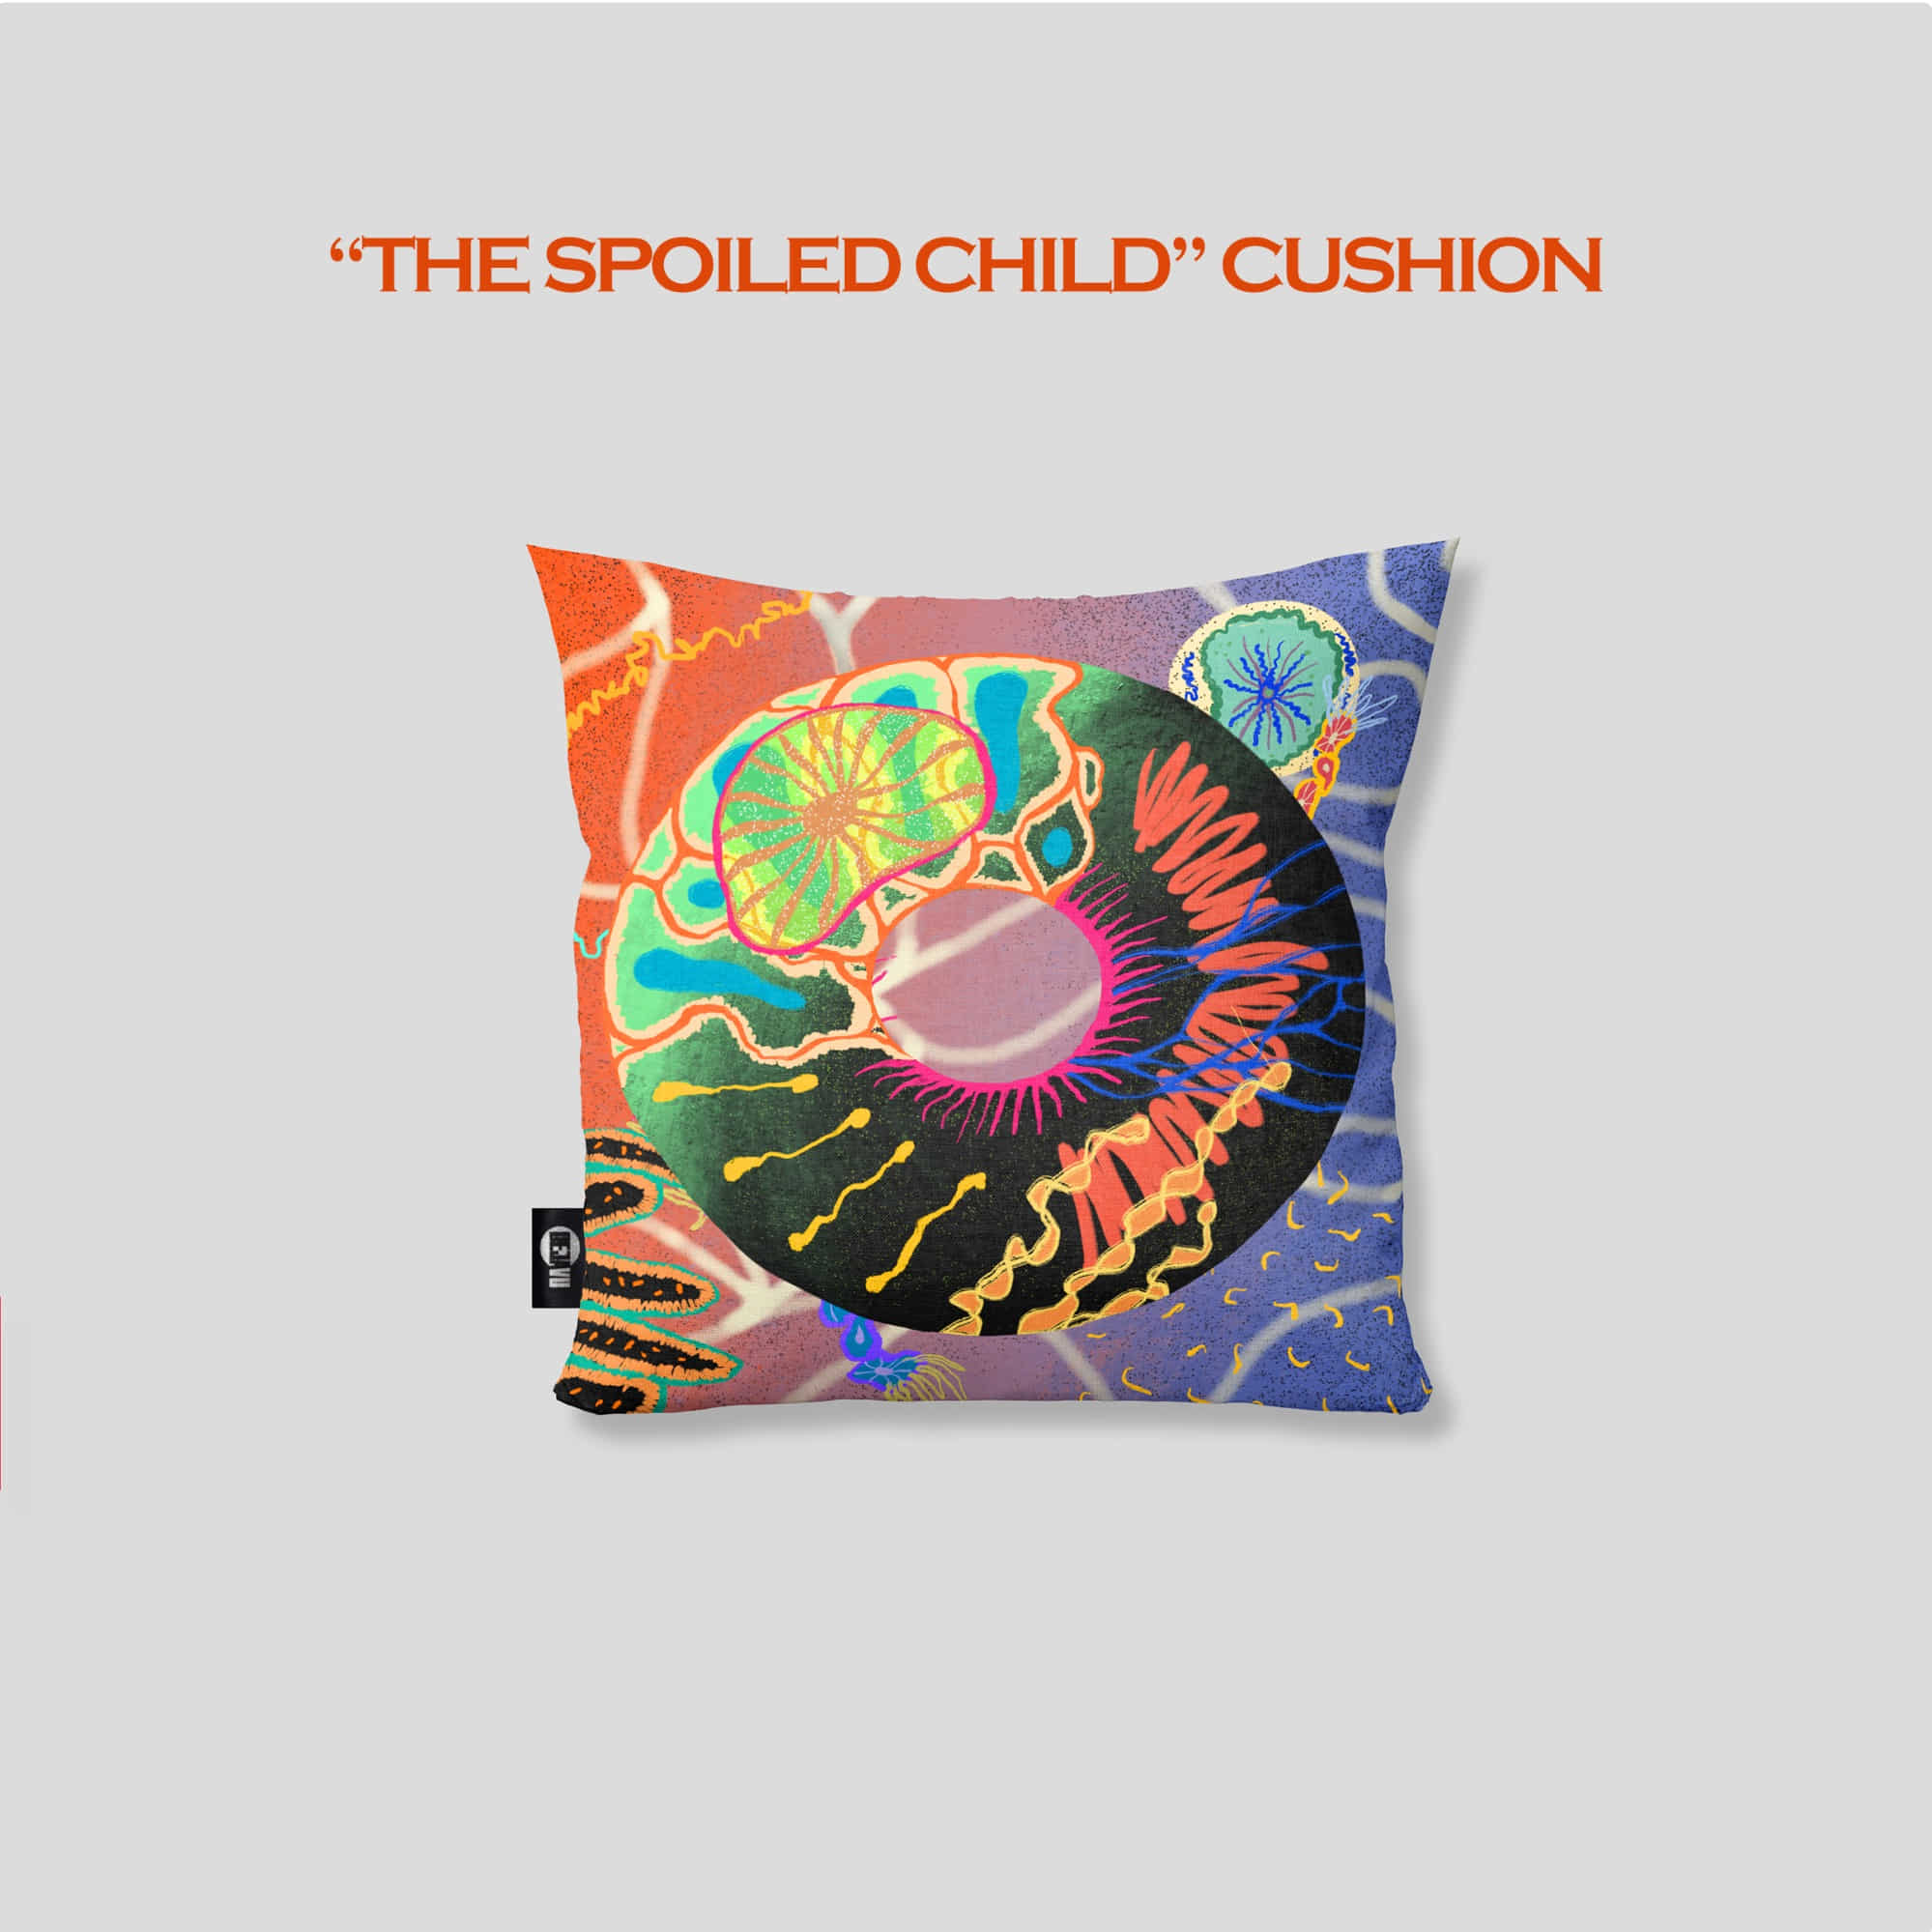 &quot;THE SPOILED CHILD&#039; CUSHION